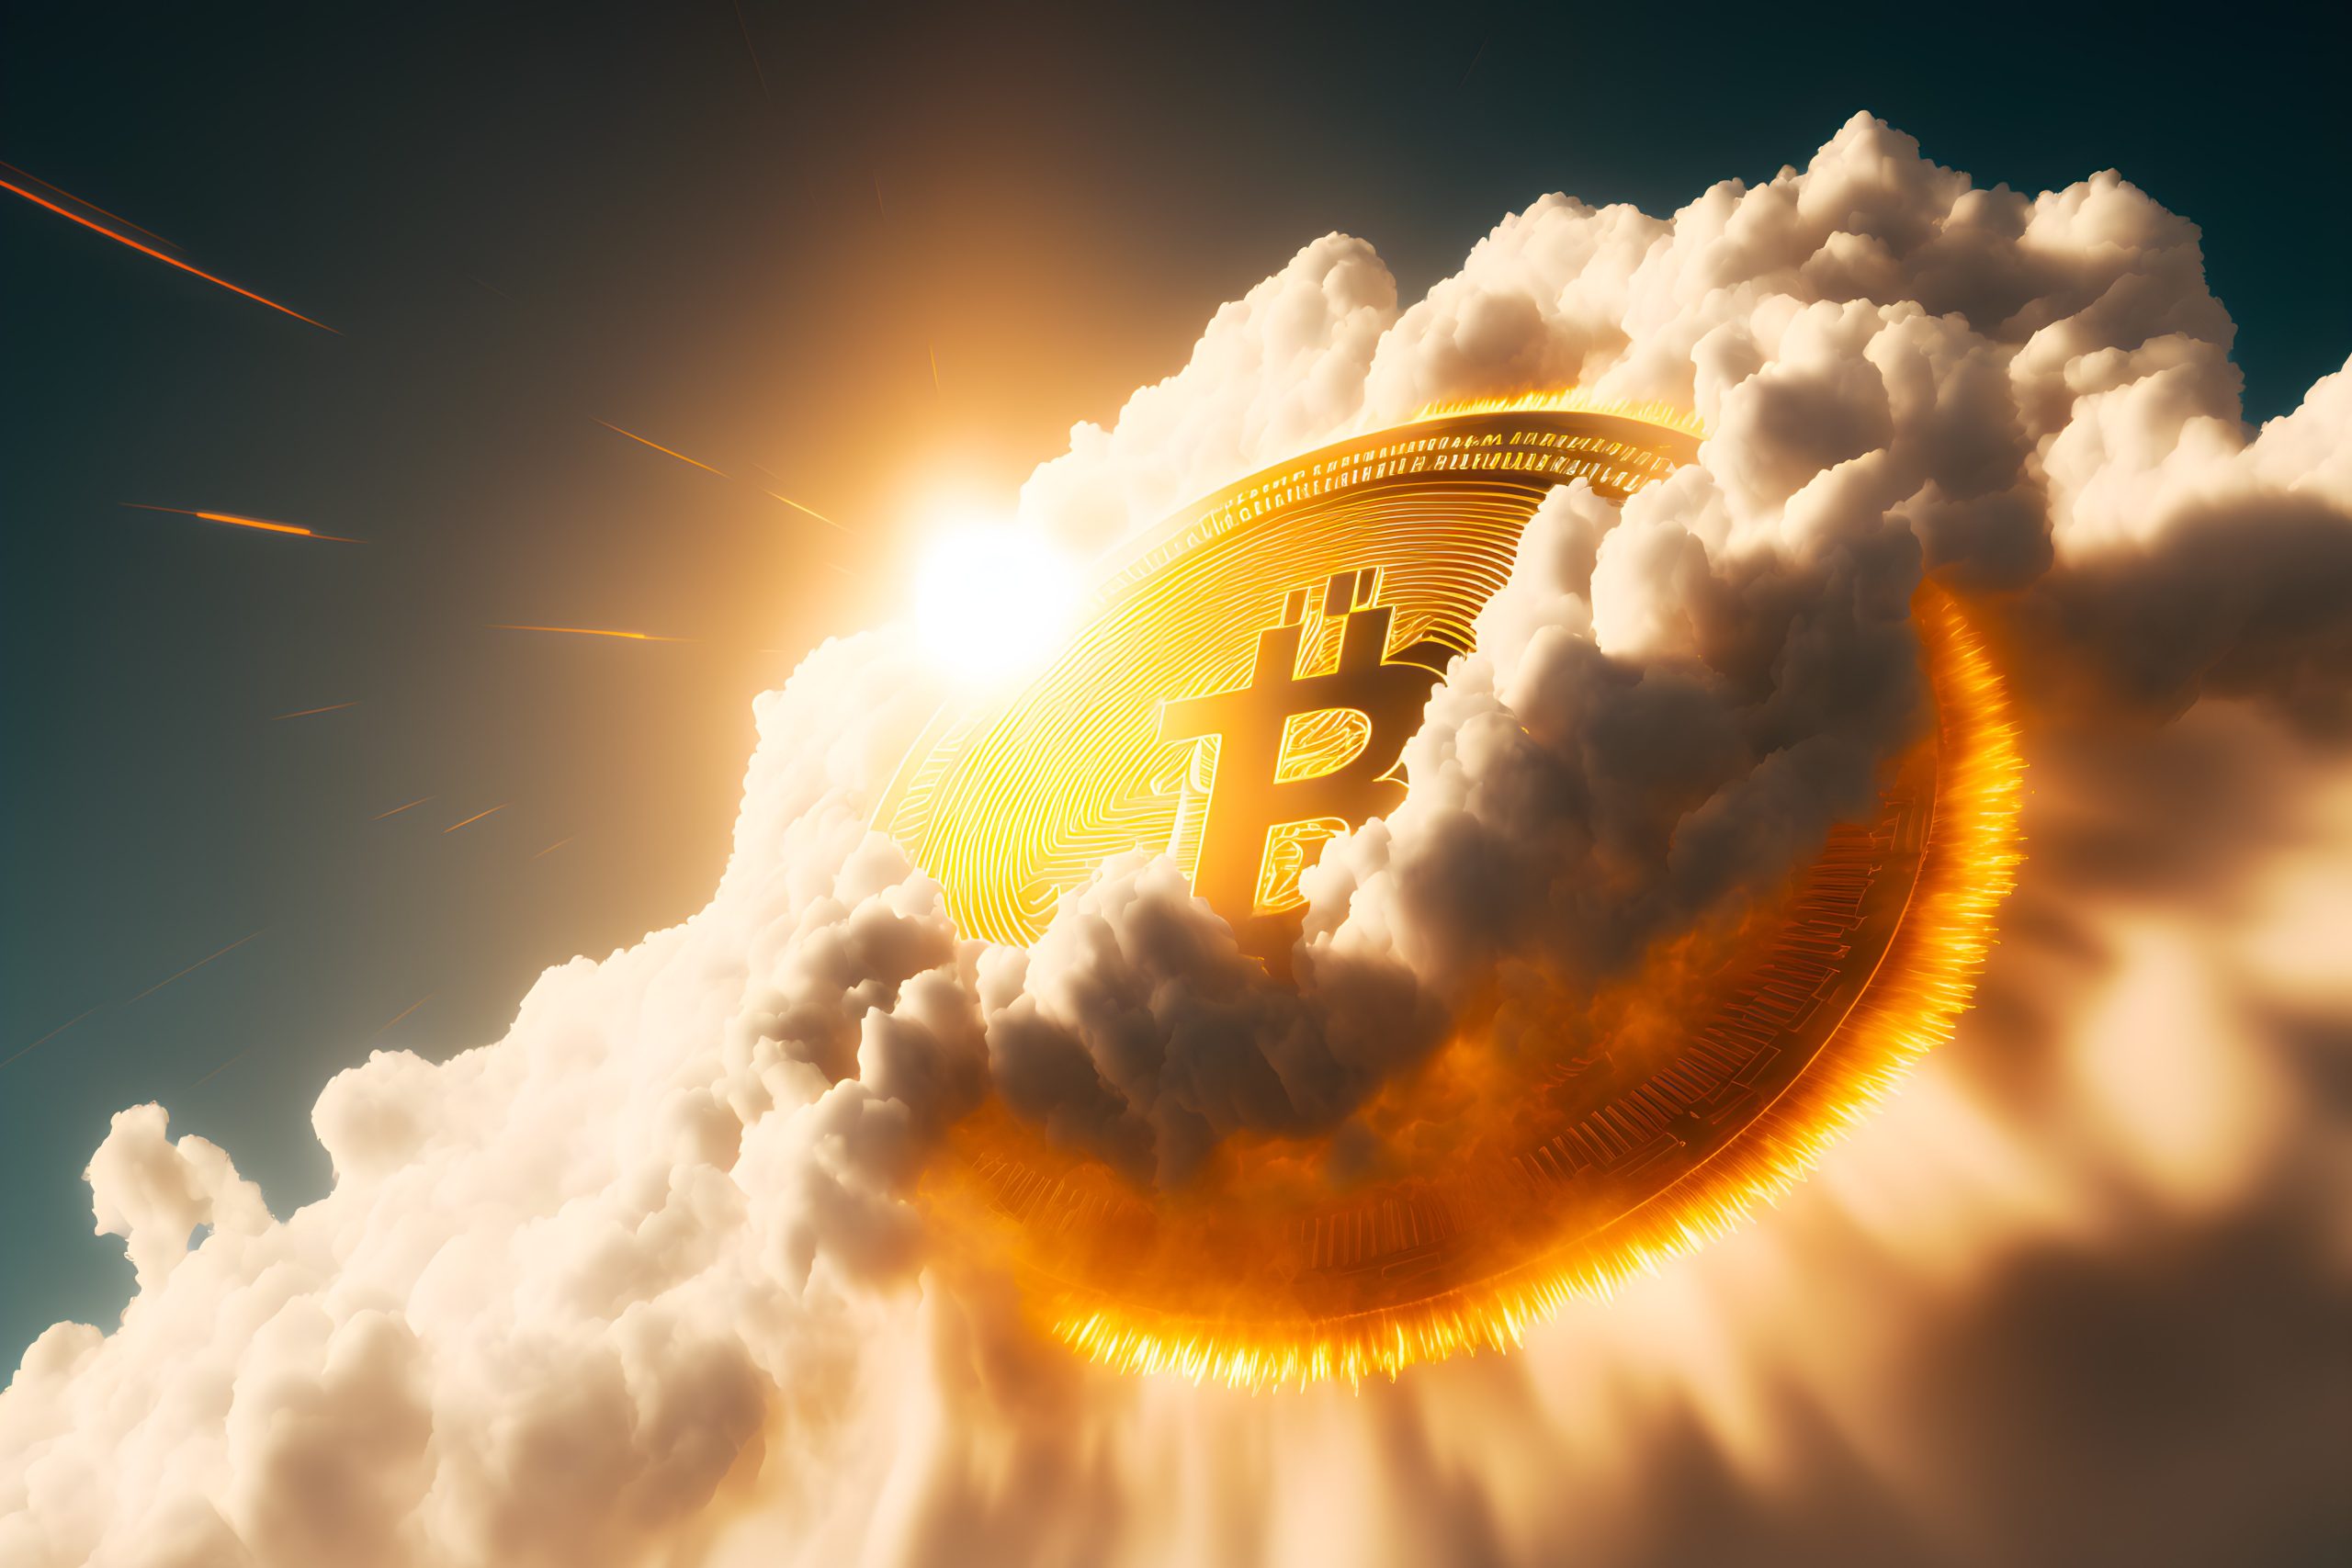 Bitcoin launches bull market? These 8 Key Indicators Just Turned Green For the First Time since Early 2021